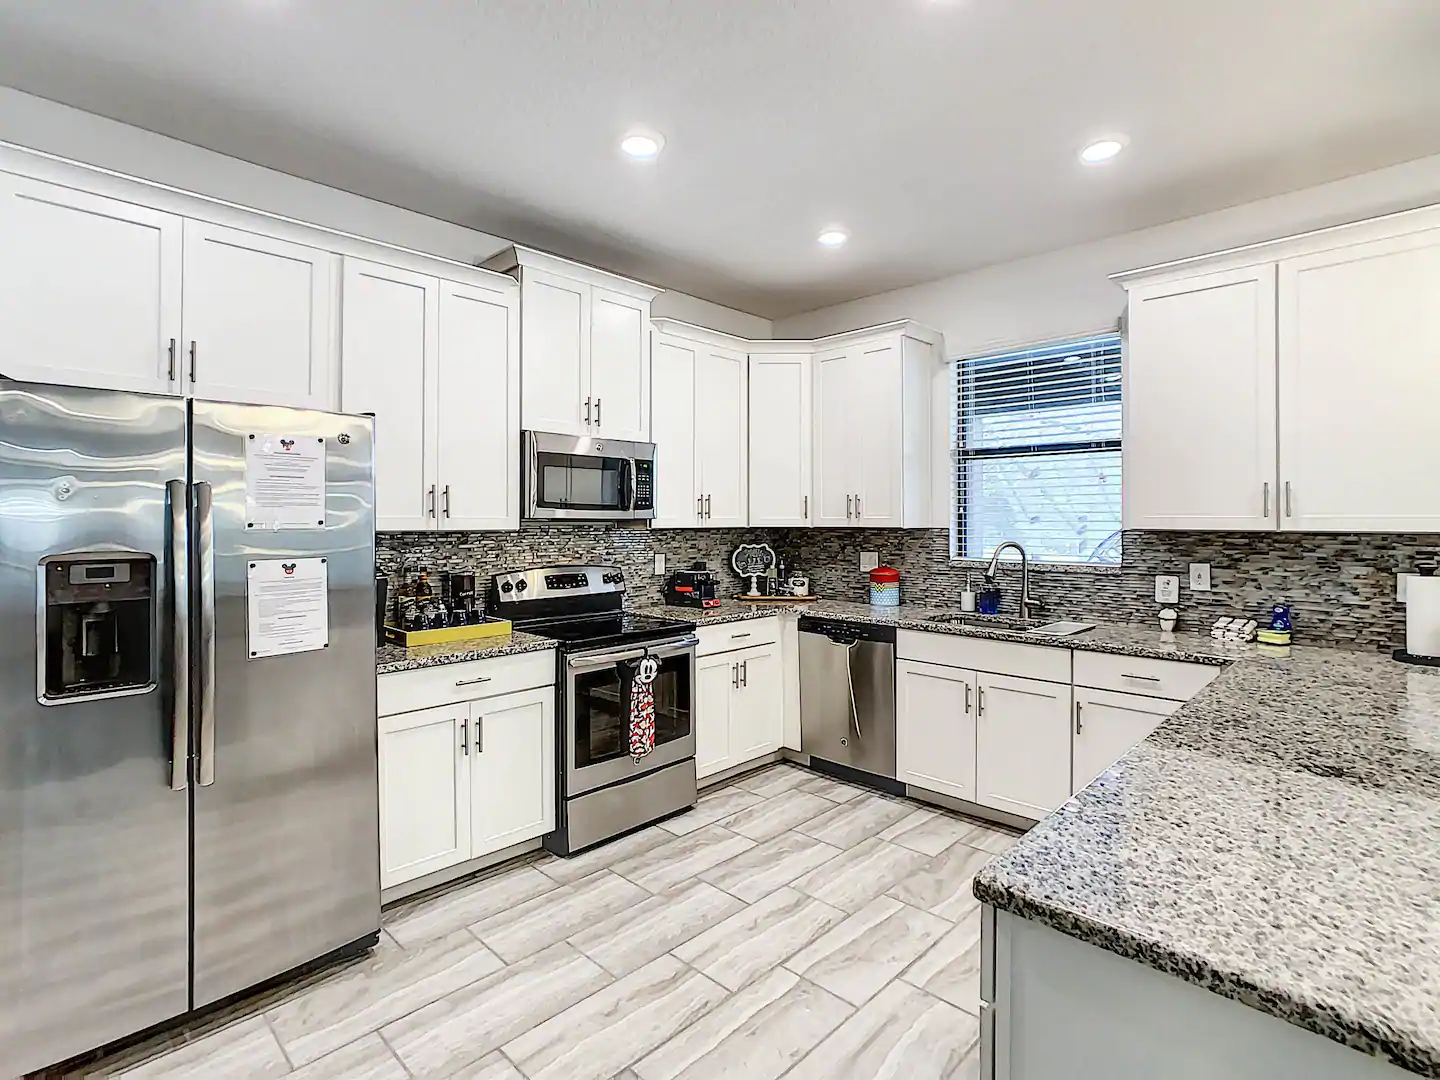 Large, fully-equipped kitchen with high-quality appliances and utensils.